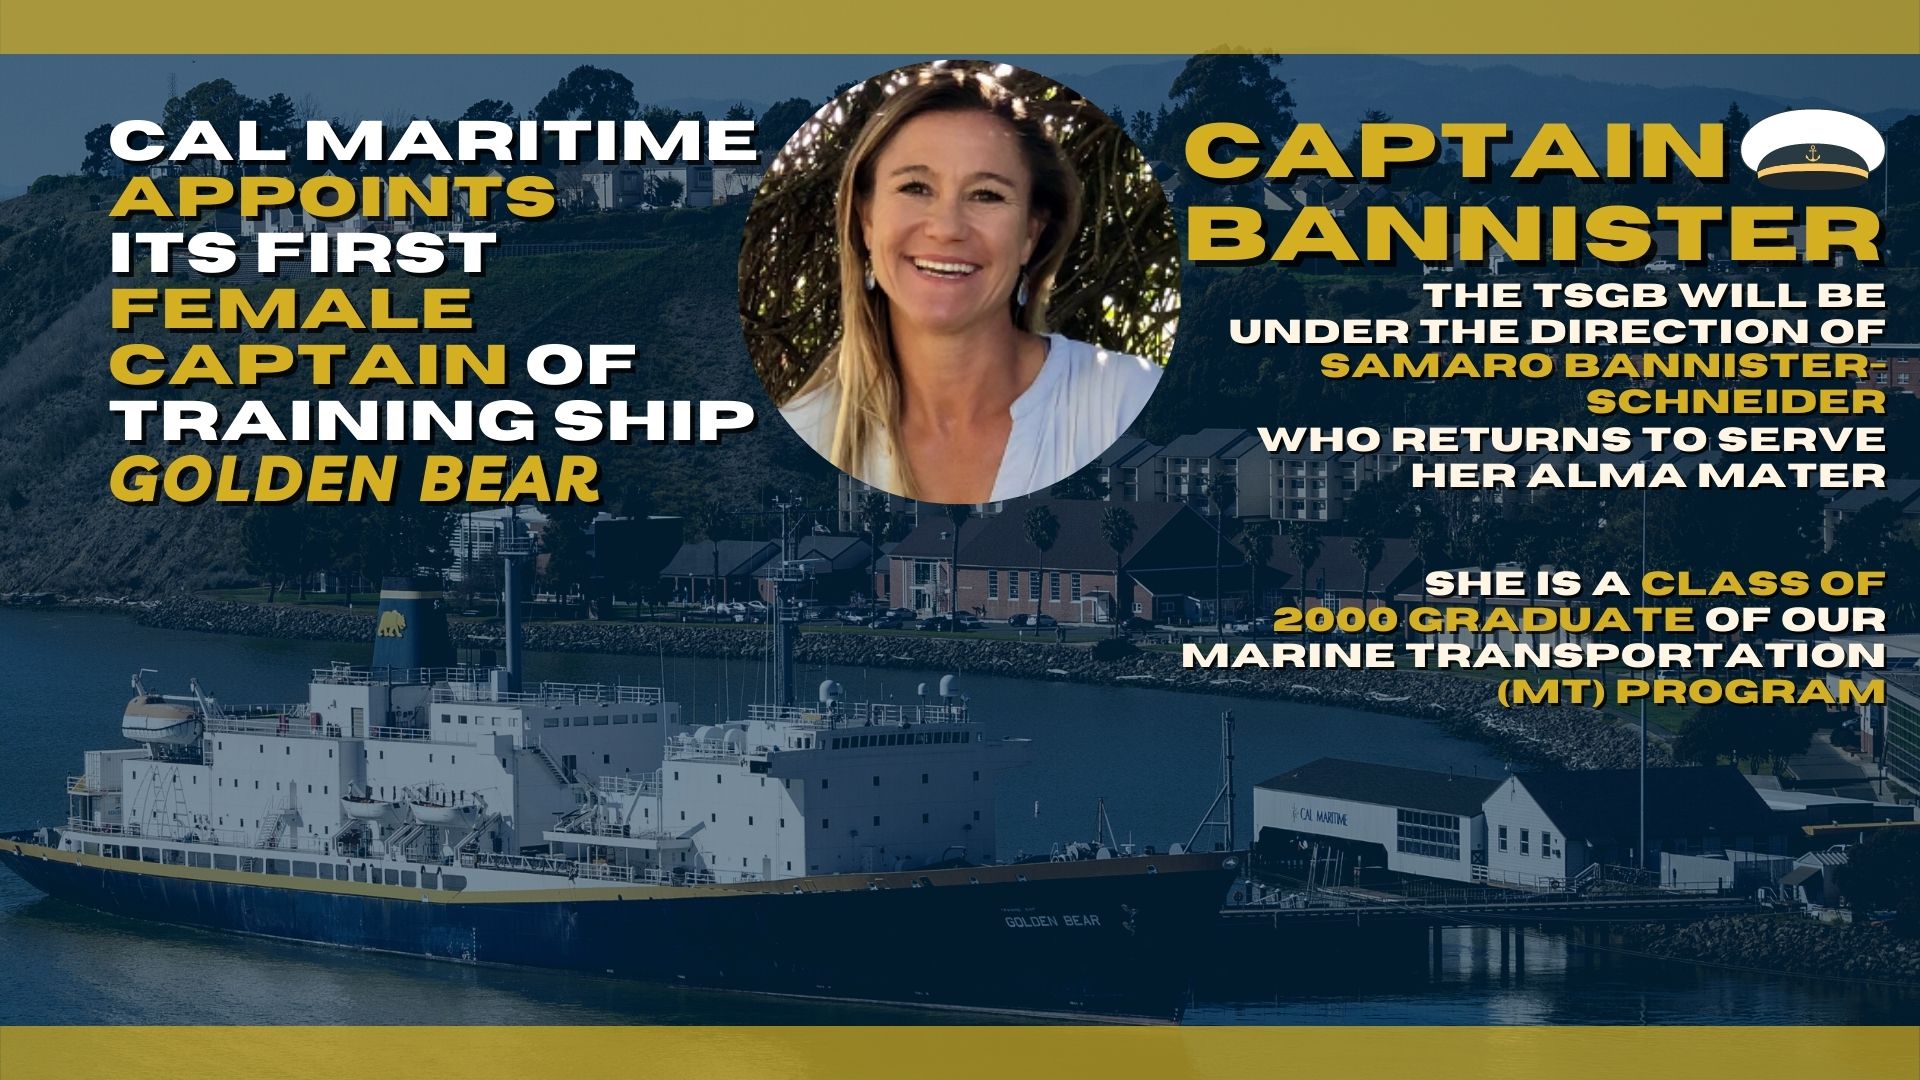 Cal Maritime Appoints its First Female Captain of Training Ship Golden